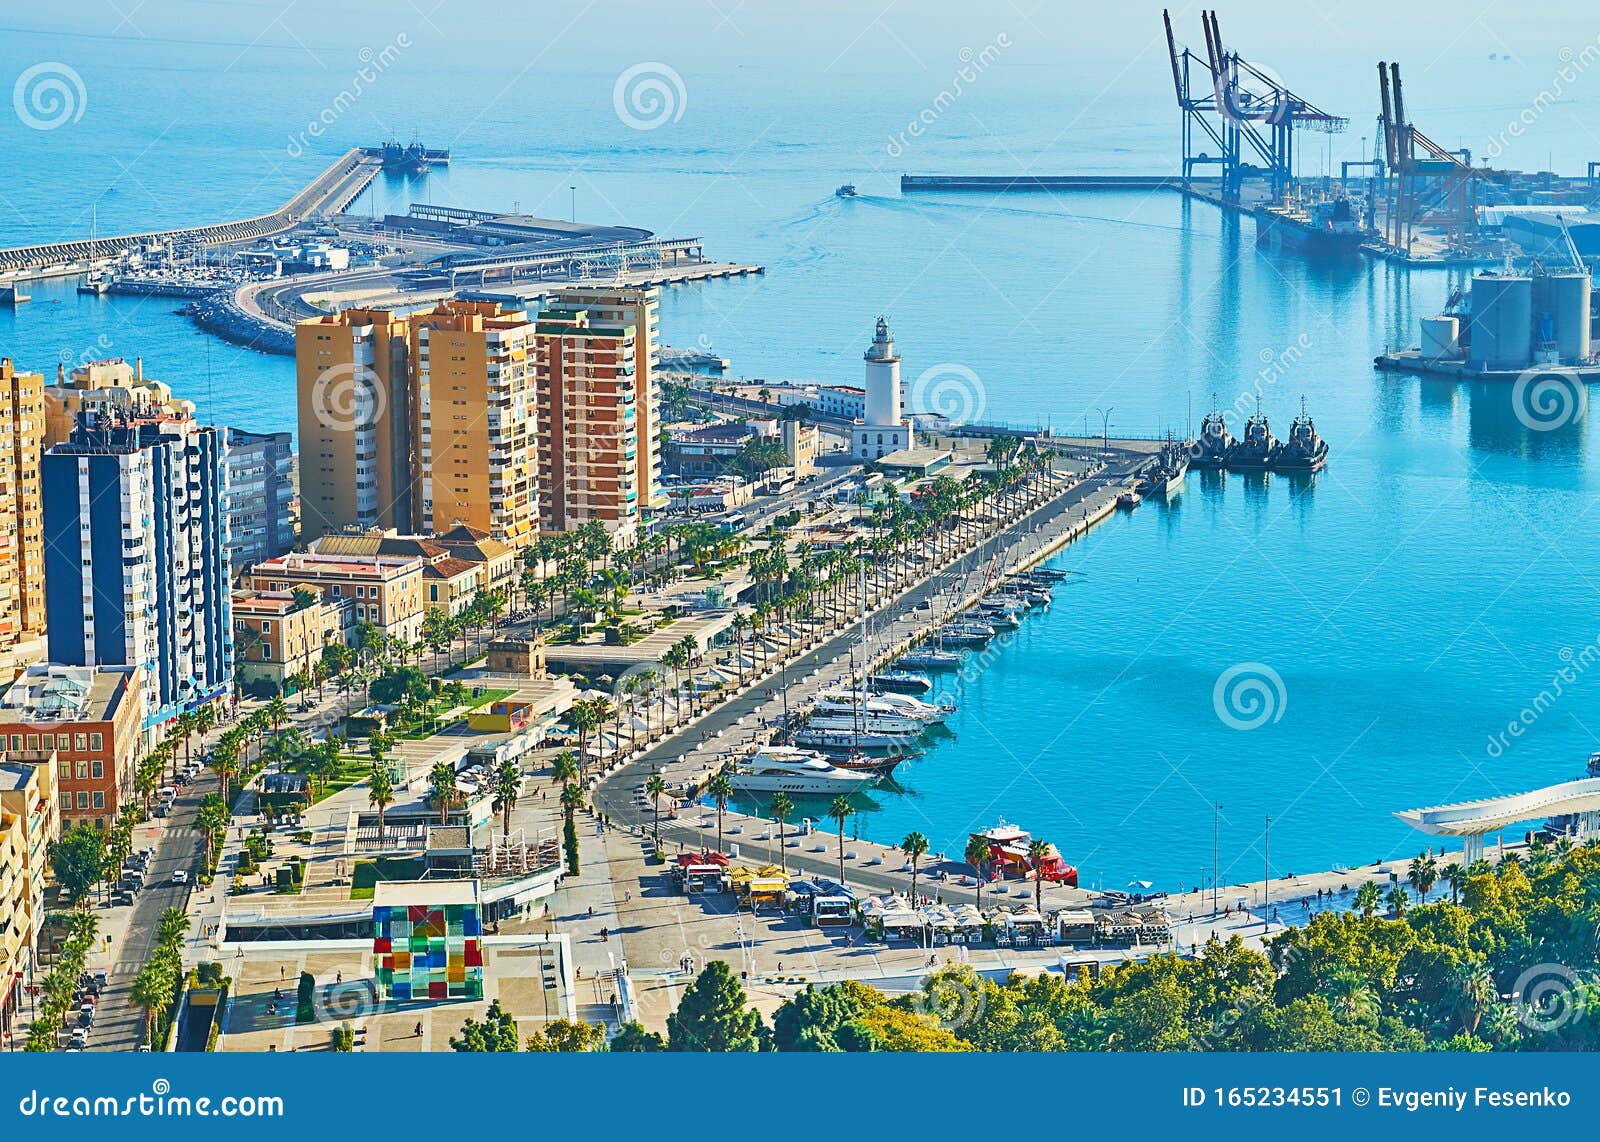 Aerial View Of Malaga Port Spain Stock Image Image Of Mansion My XXX Hot Girl